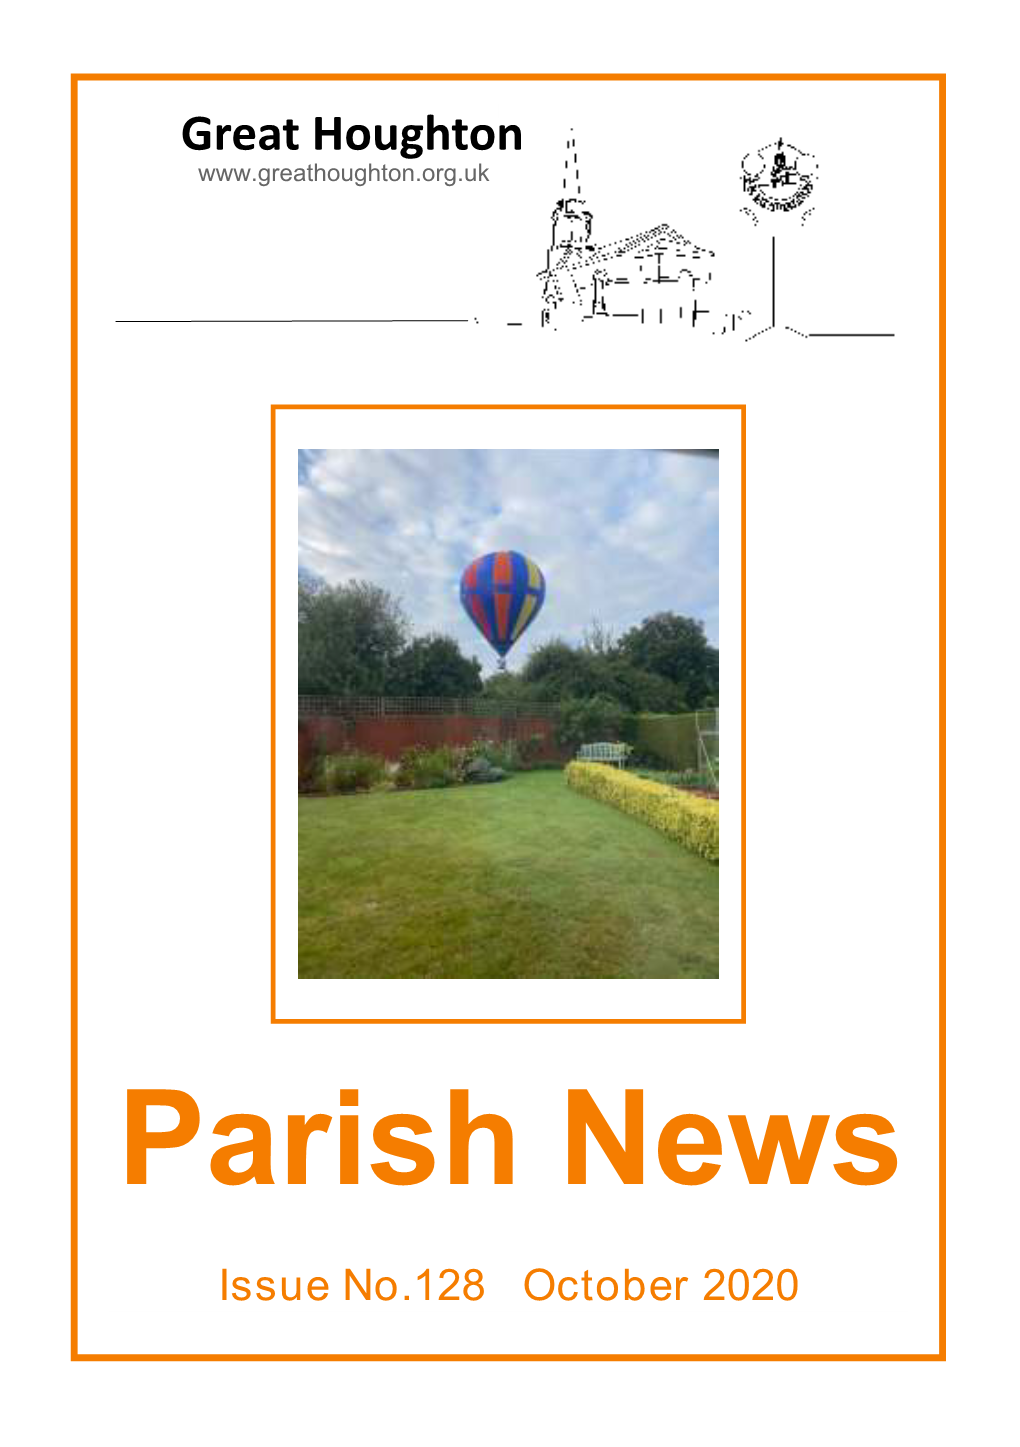 PARISH NEWSLETTER ADVERTISING RATES for 2020 Price for Guaranteed Position on Page 3 with Or Without Colour Available on Request